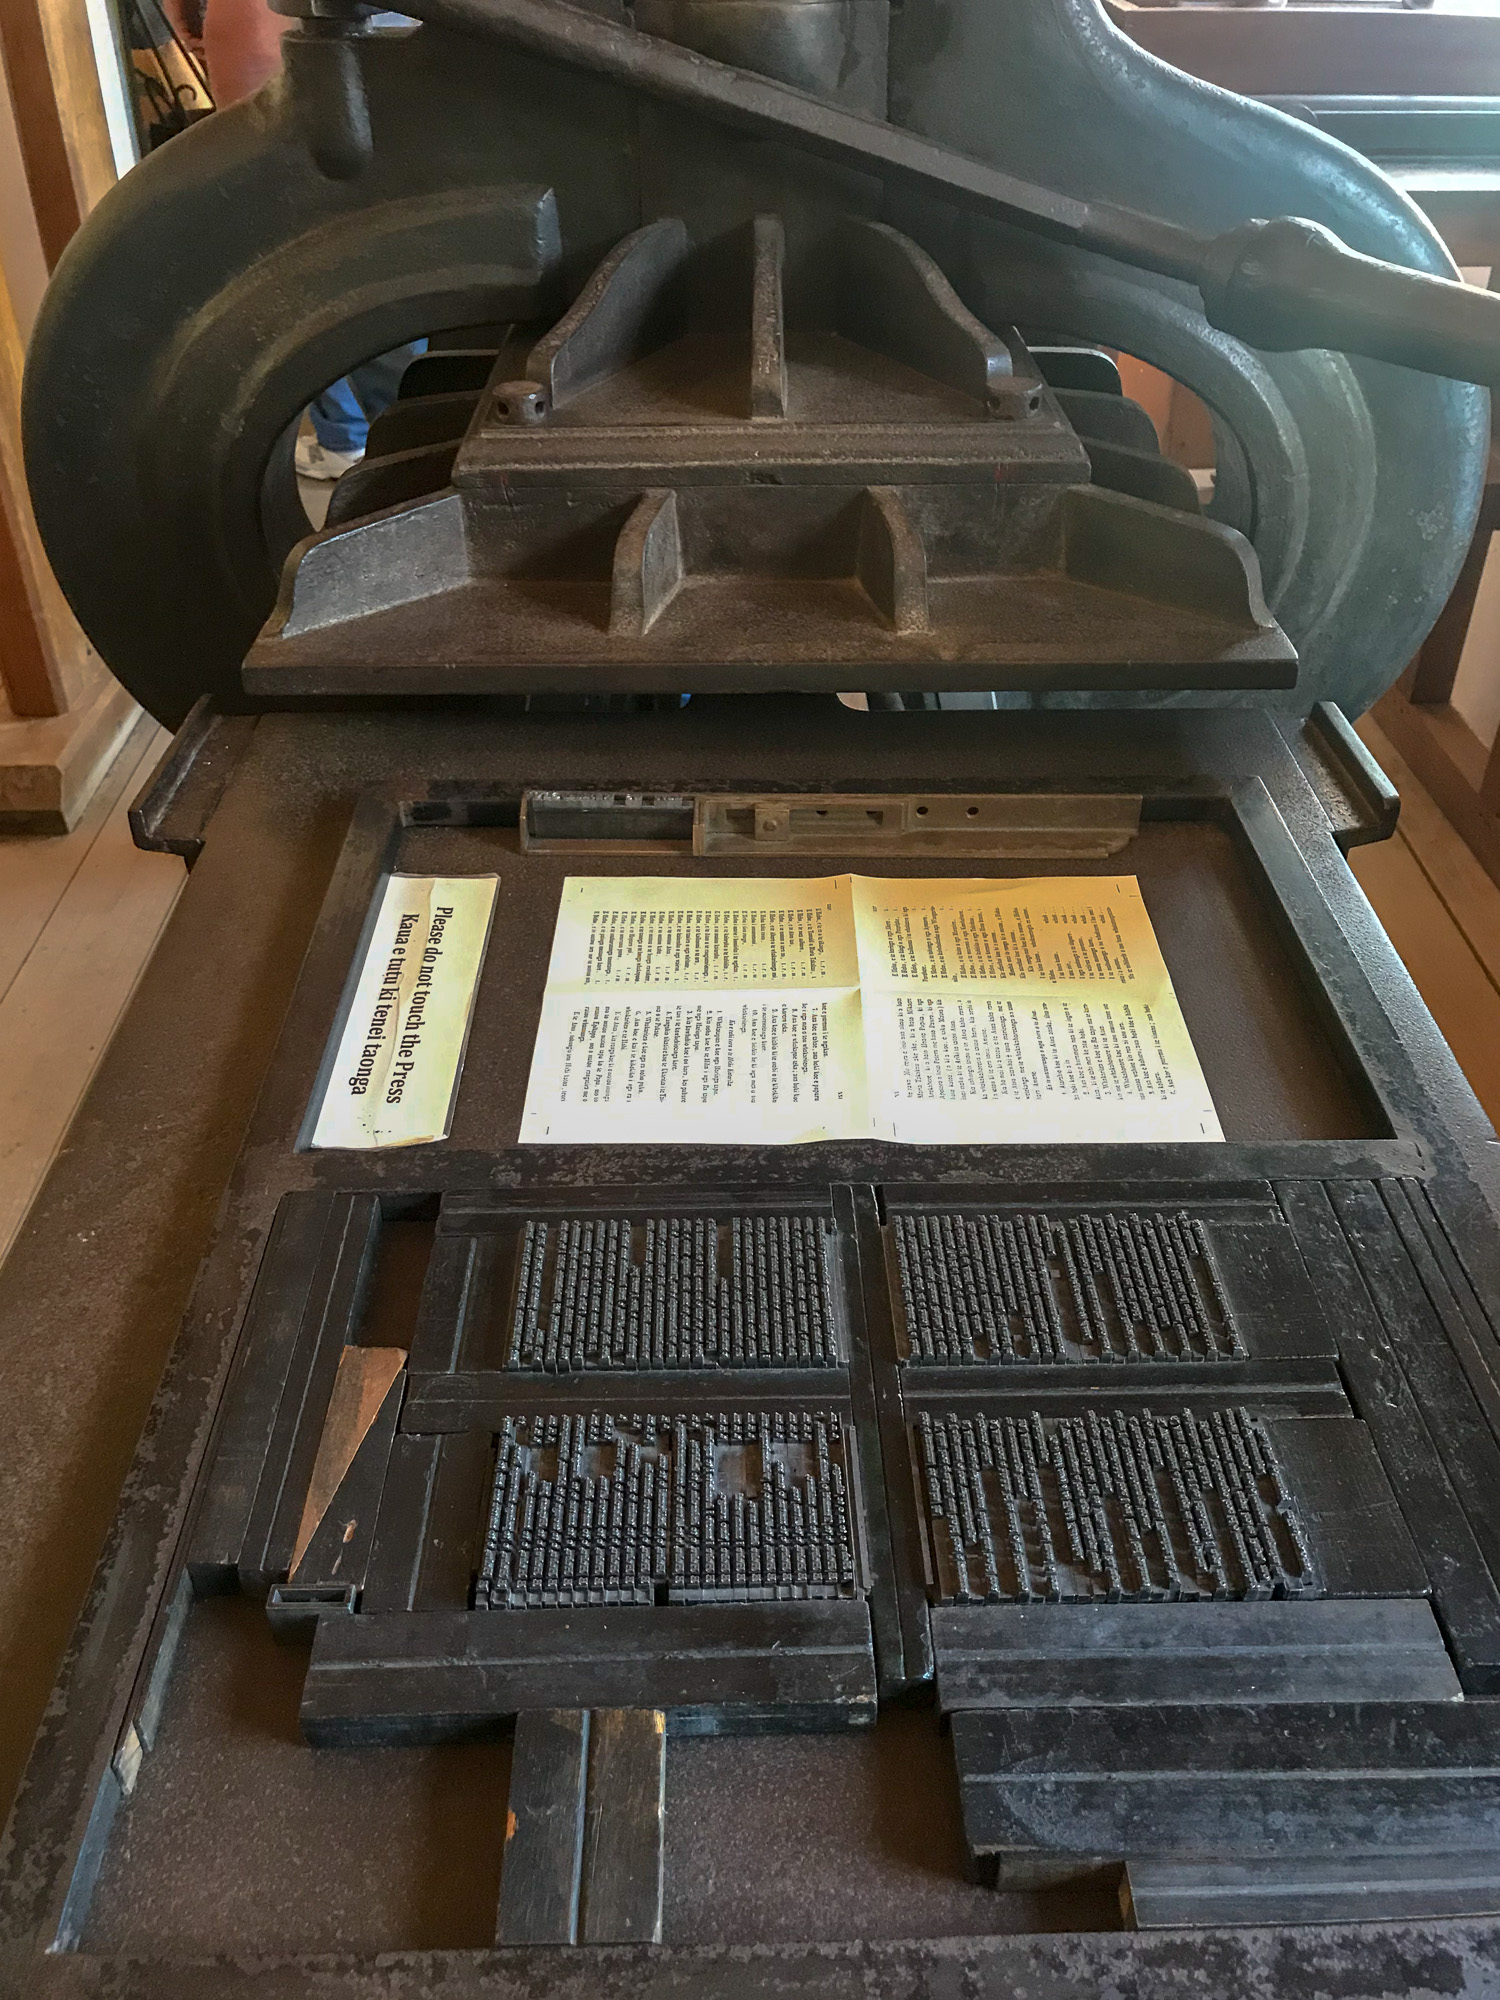 Printing press in Russell